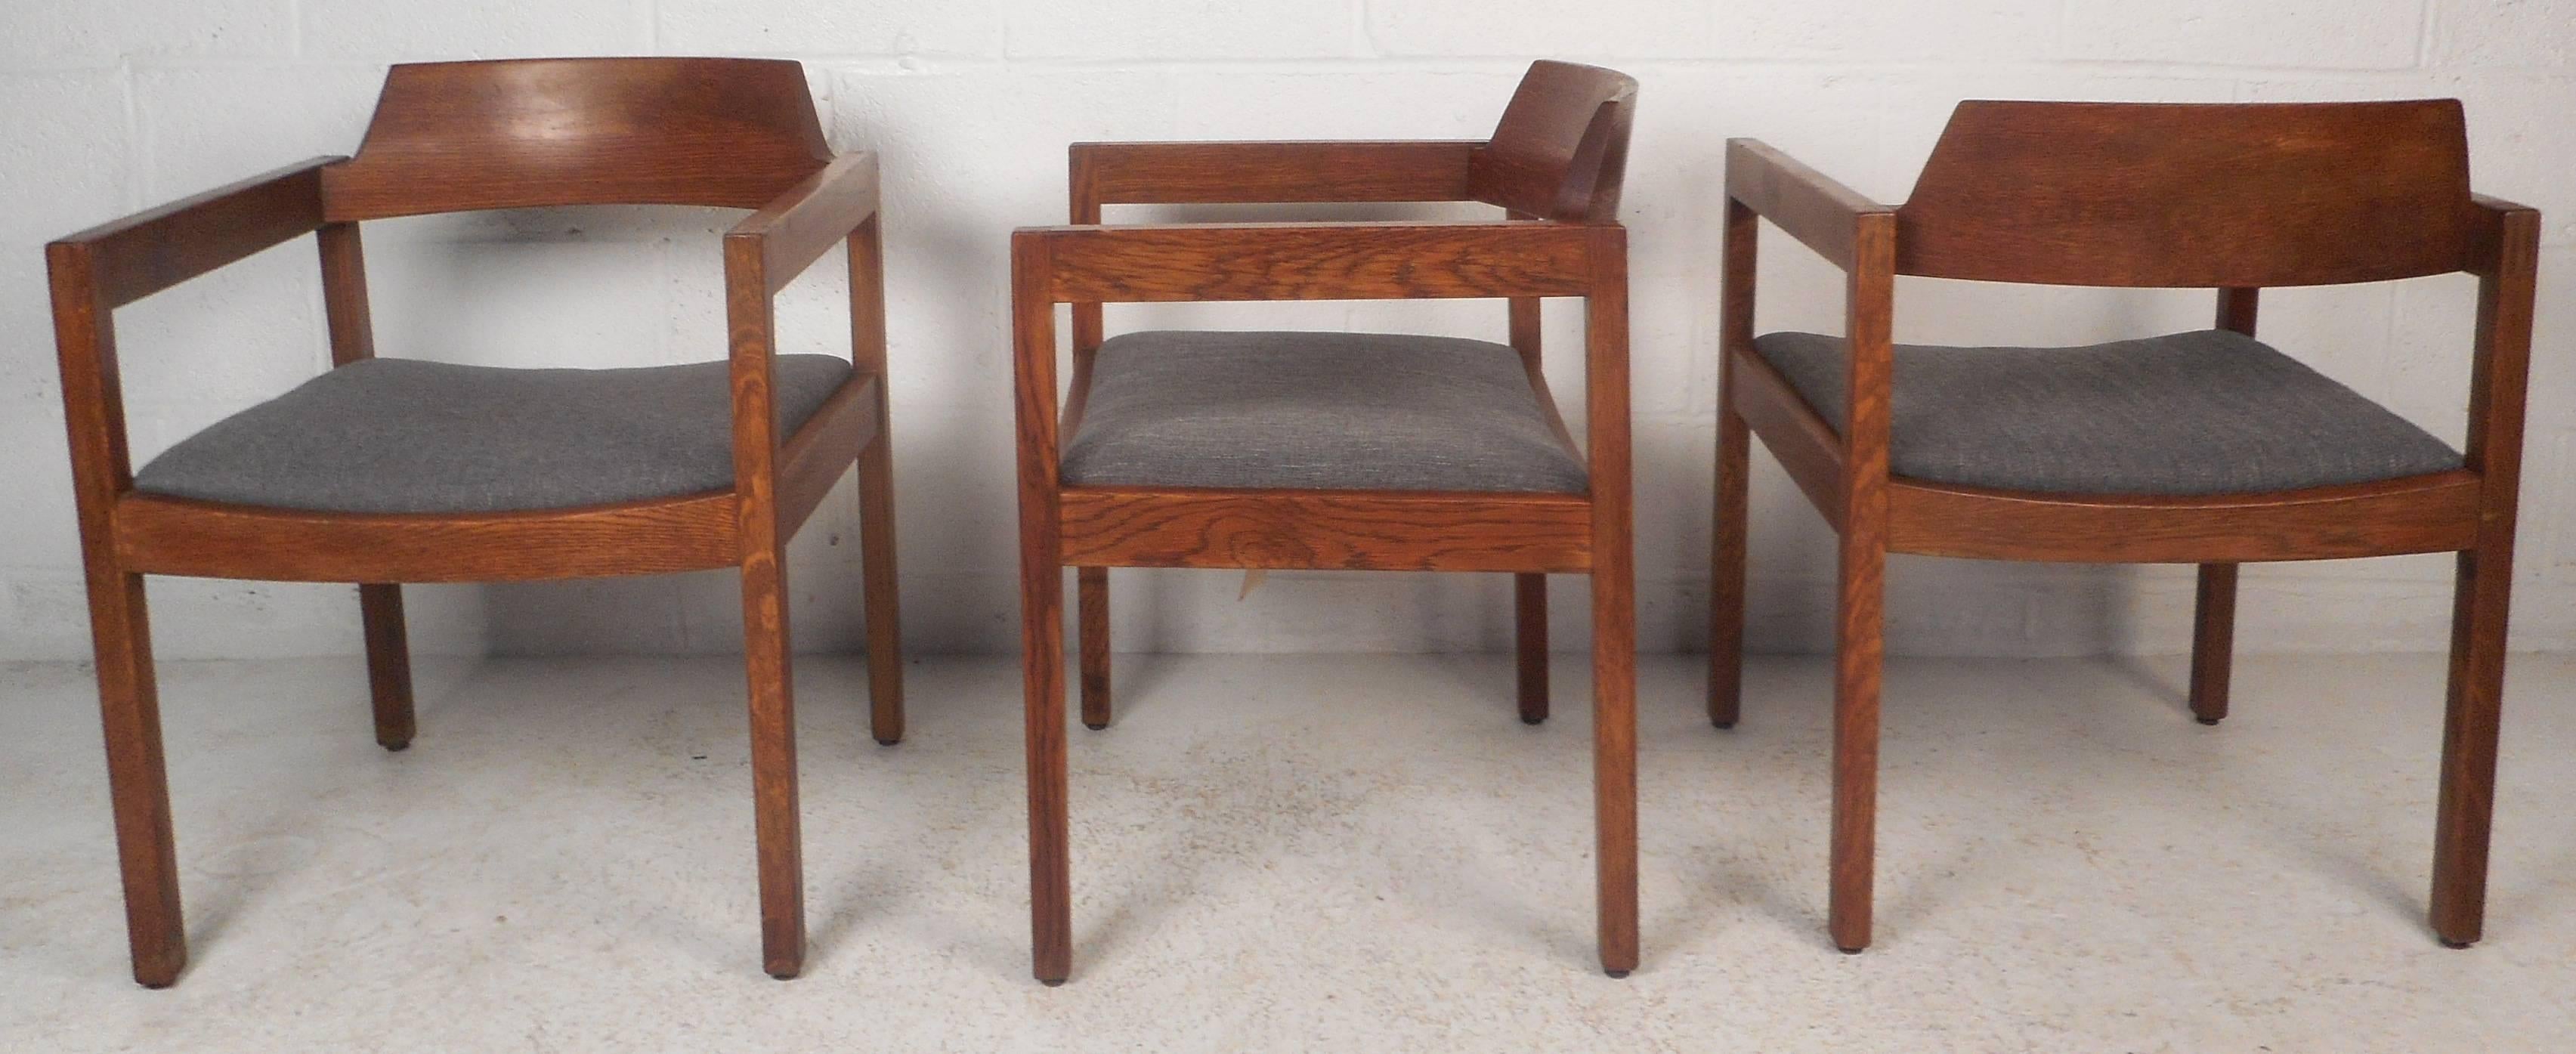 This beautiful set of five vintage modern dining chairs feature a solid walnut frame with arm rests and an upholstered seat. Sleek design with a curved backrest ensures maximum comfort without sacrificing style. Straight line design with dovetail